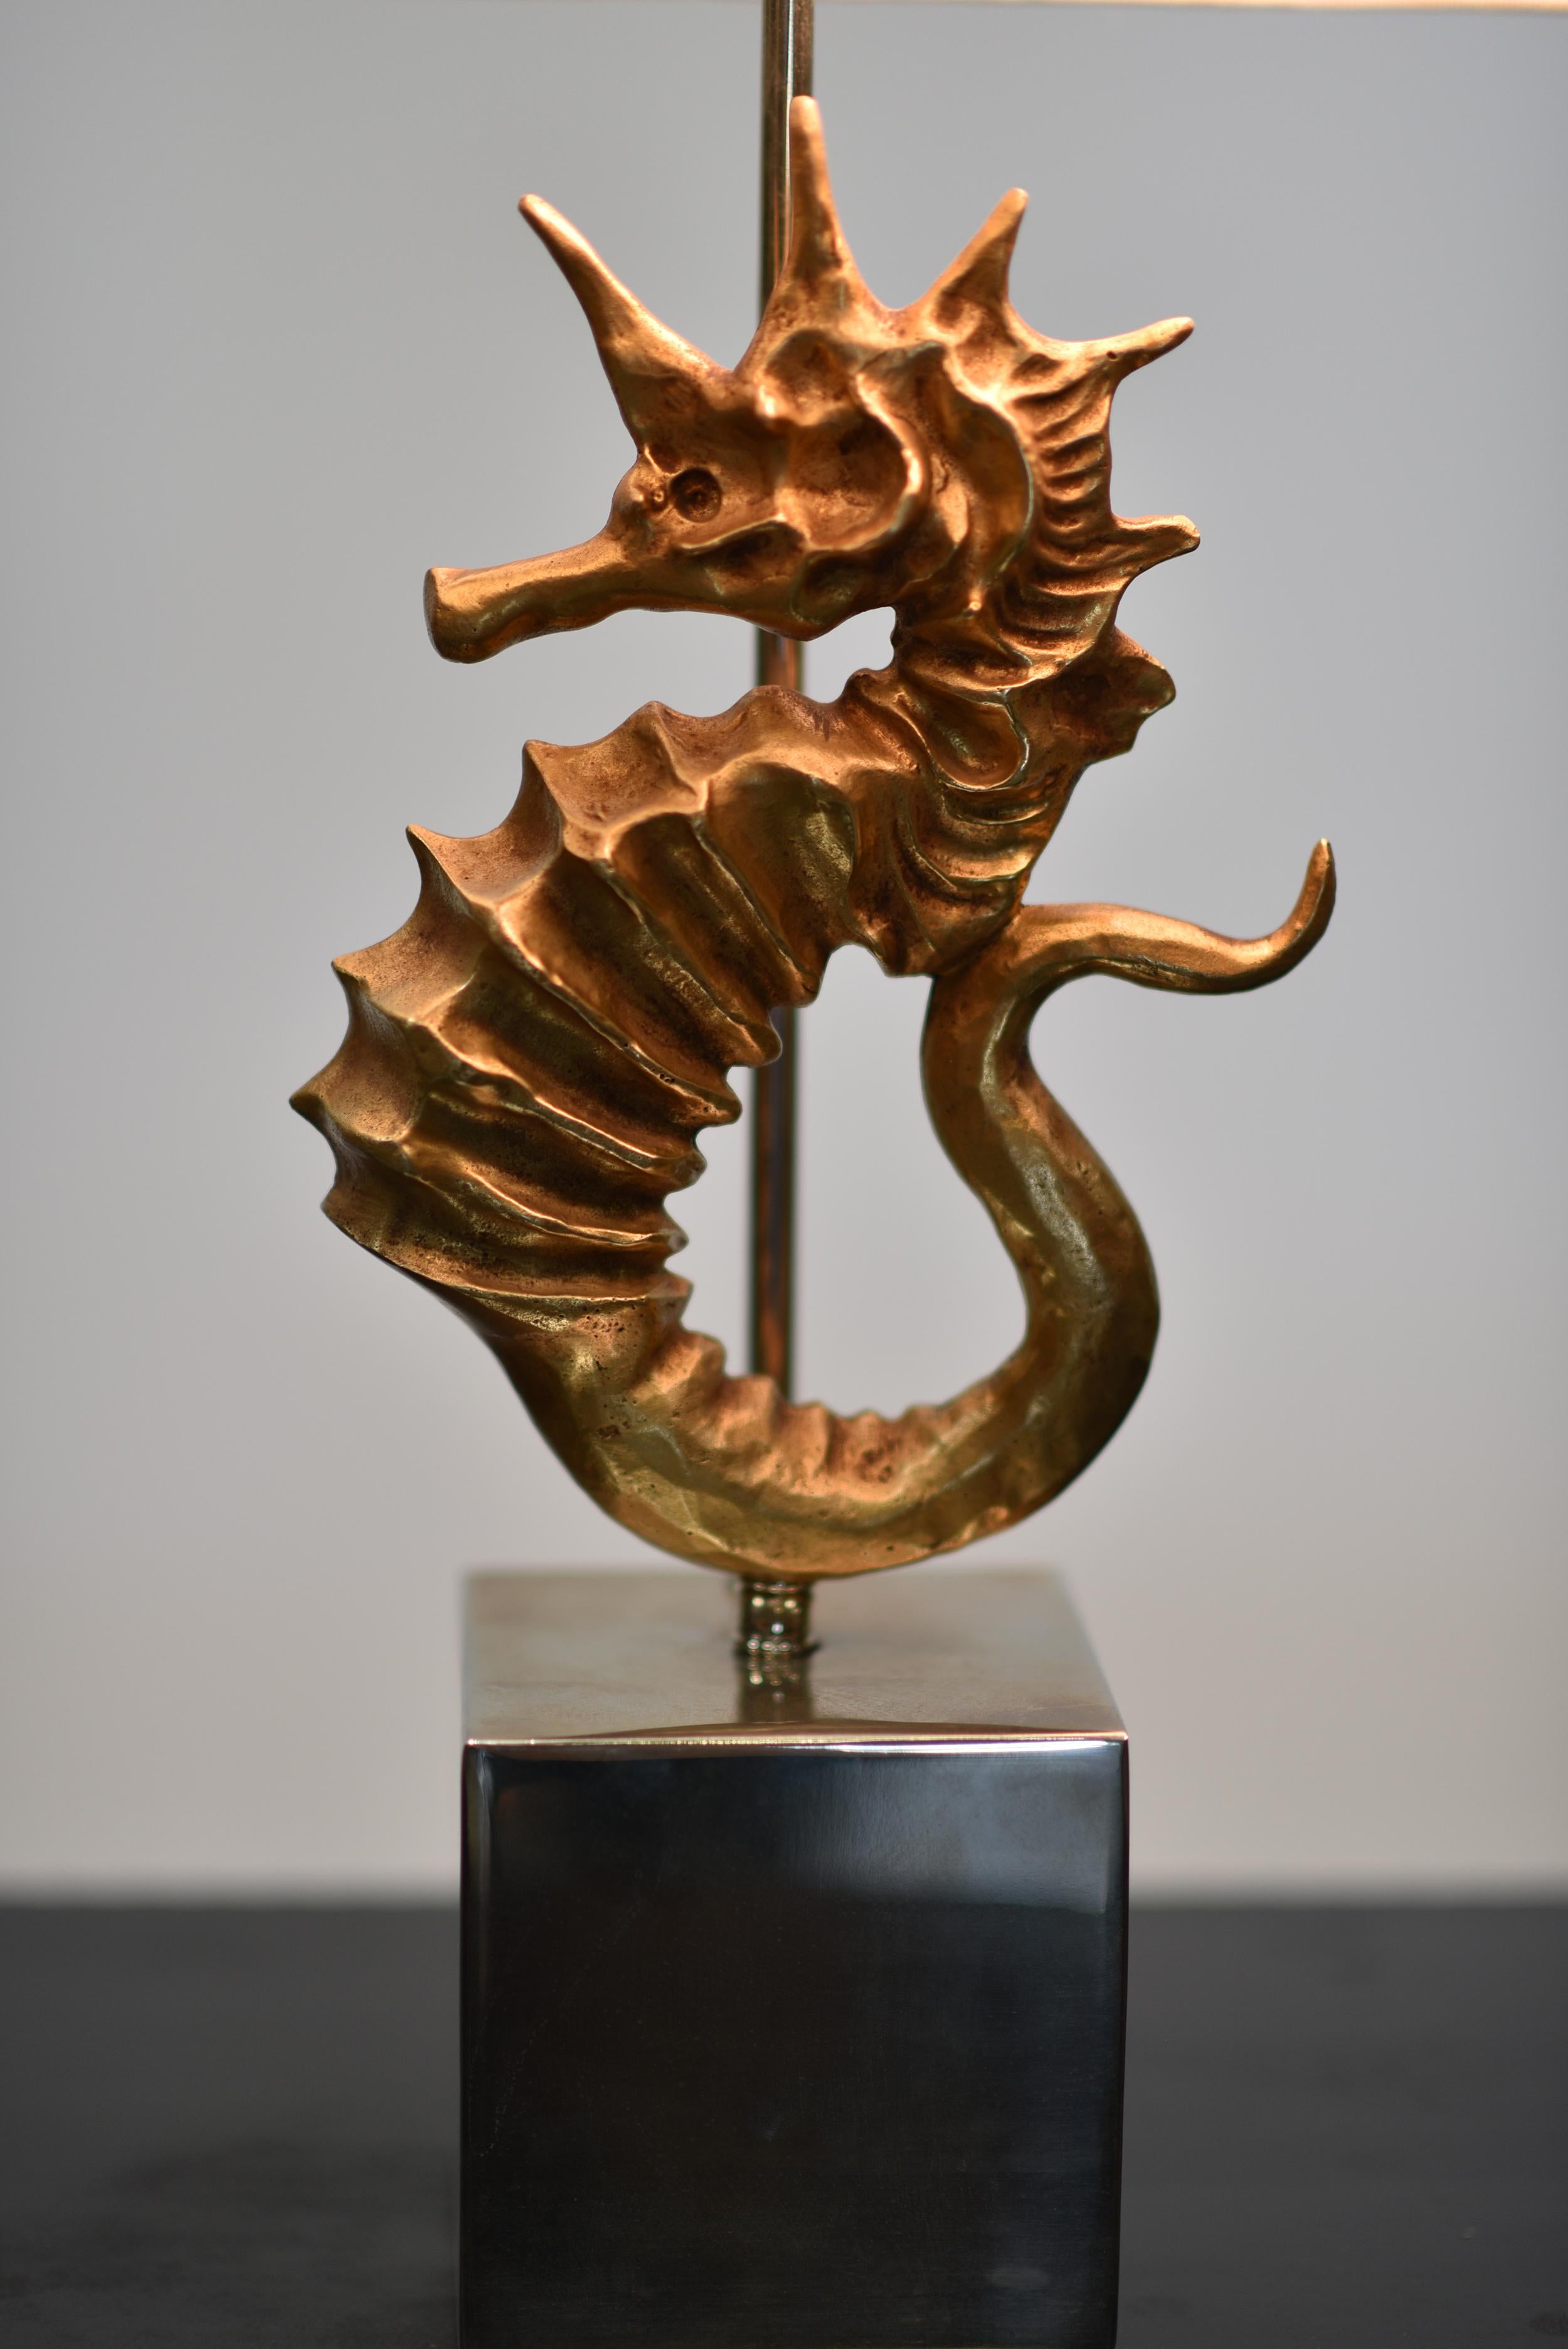 Seahorse sculpted lamp cast in gilt metal against a chrome rod, circa 1950s. Unknown artist or designer.